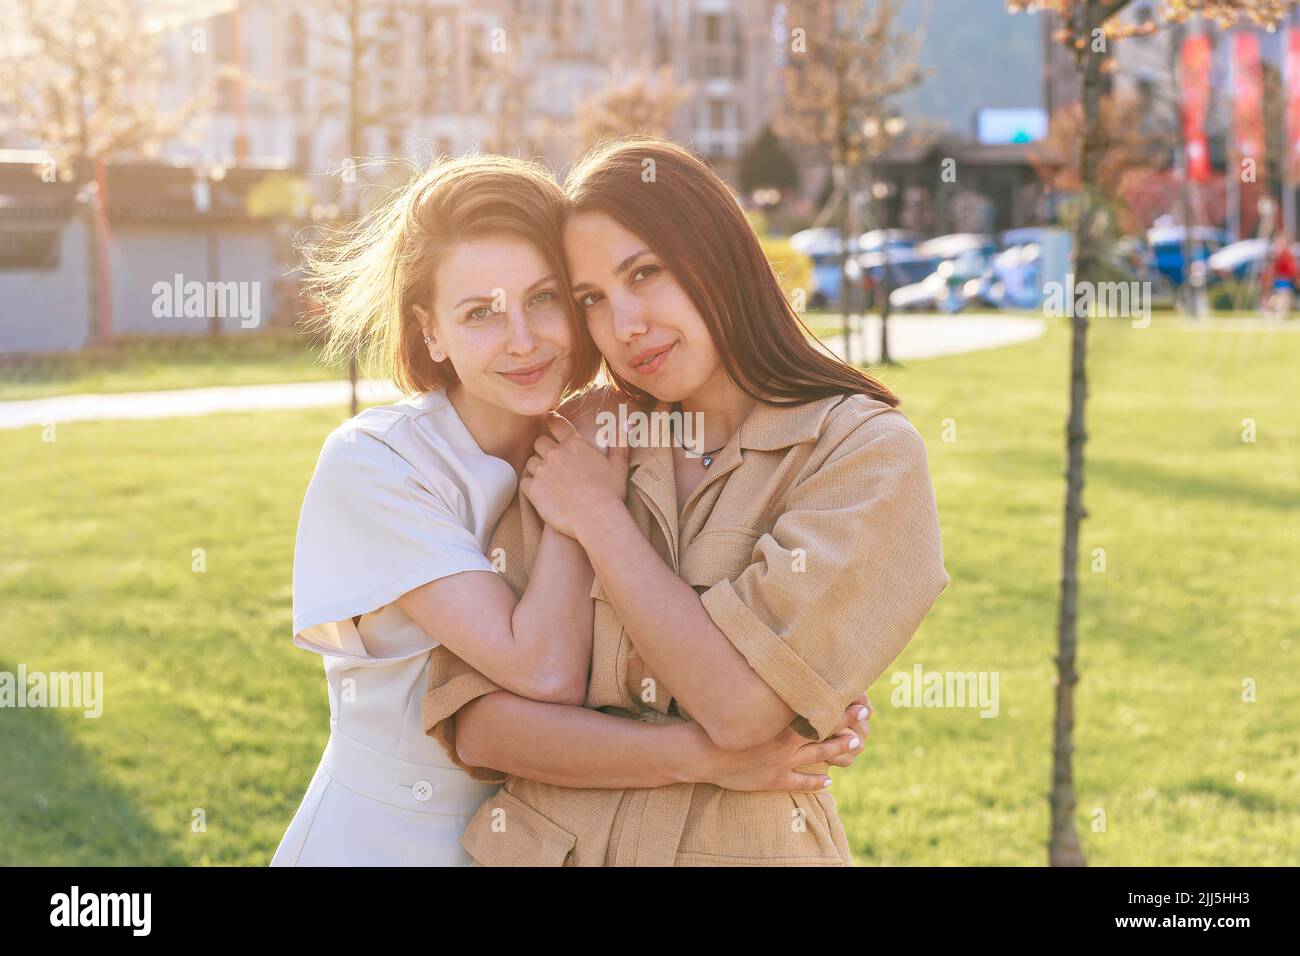 Happy woman with friend standing at park on sunny day Stock Photo